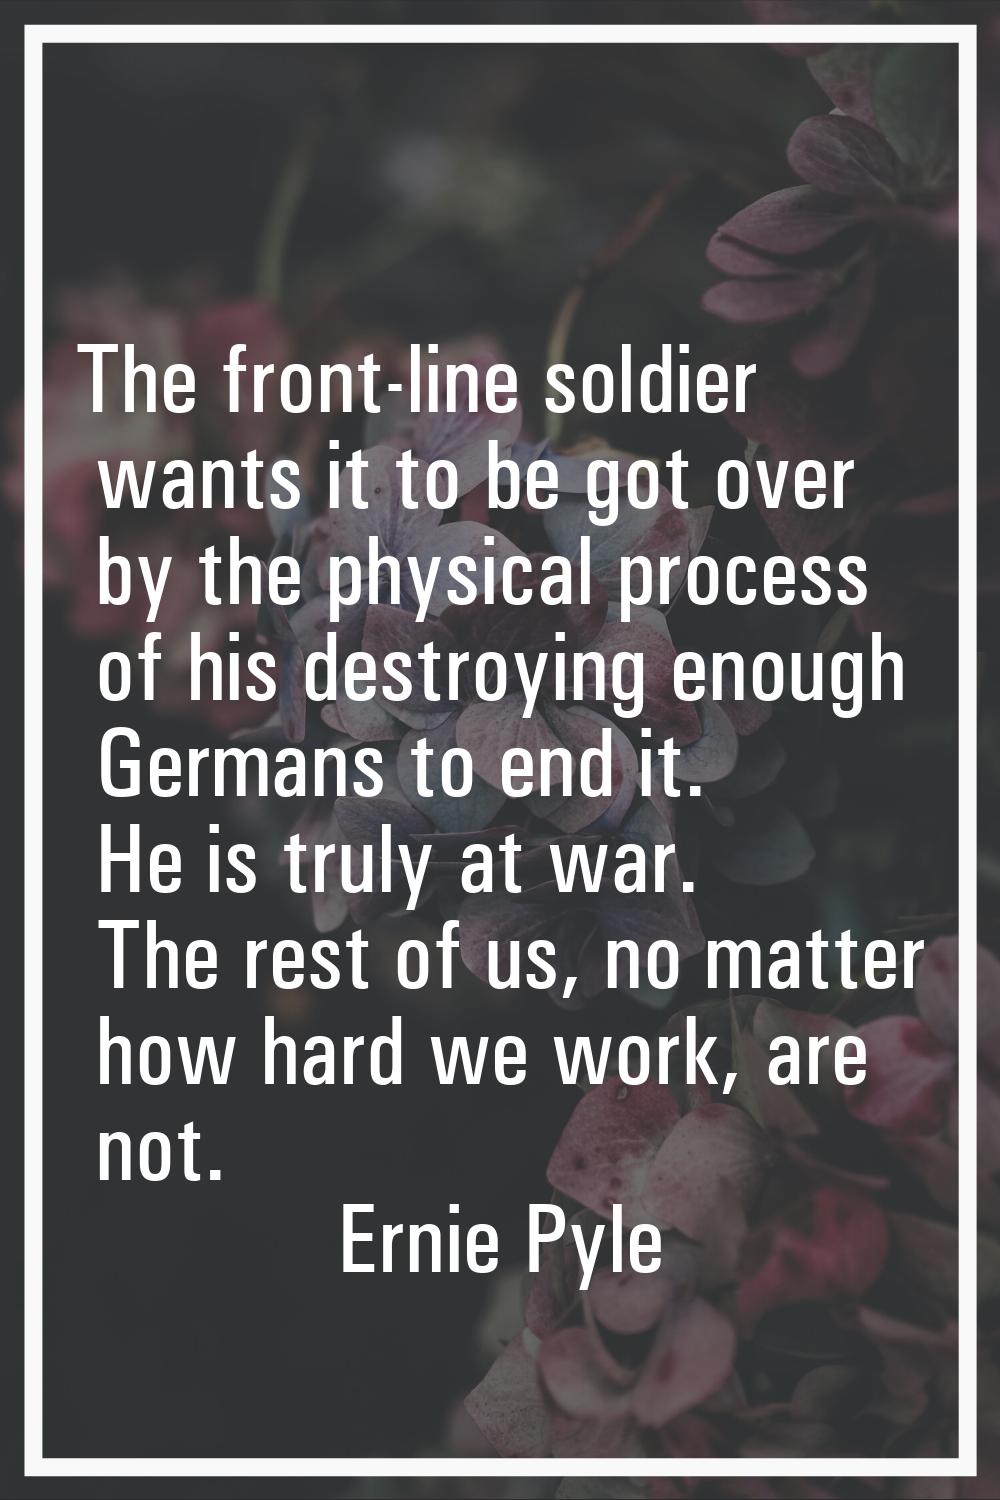 The front-line soldier wants it to be got over by the physical process of his destroying enough Ger